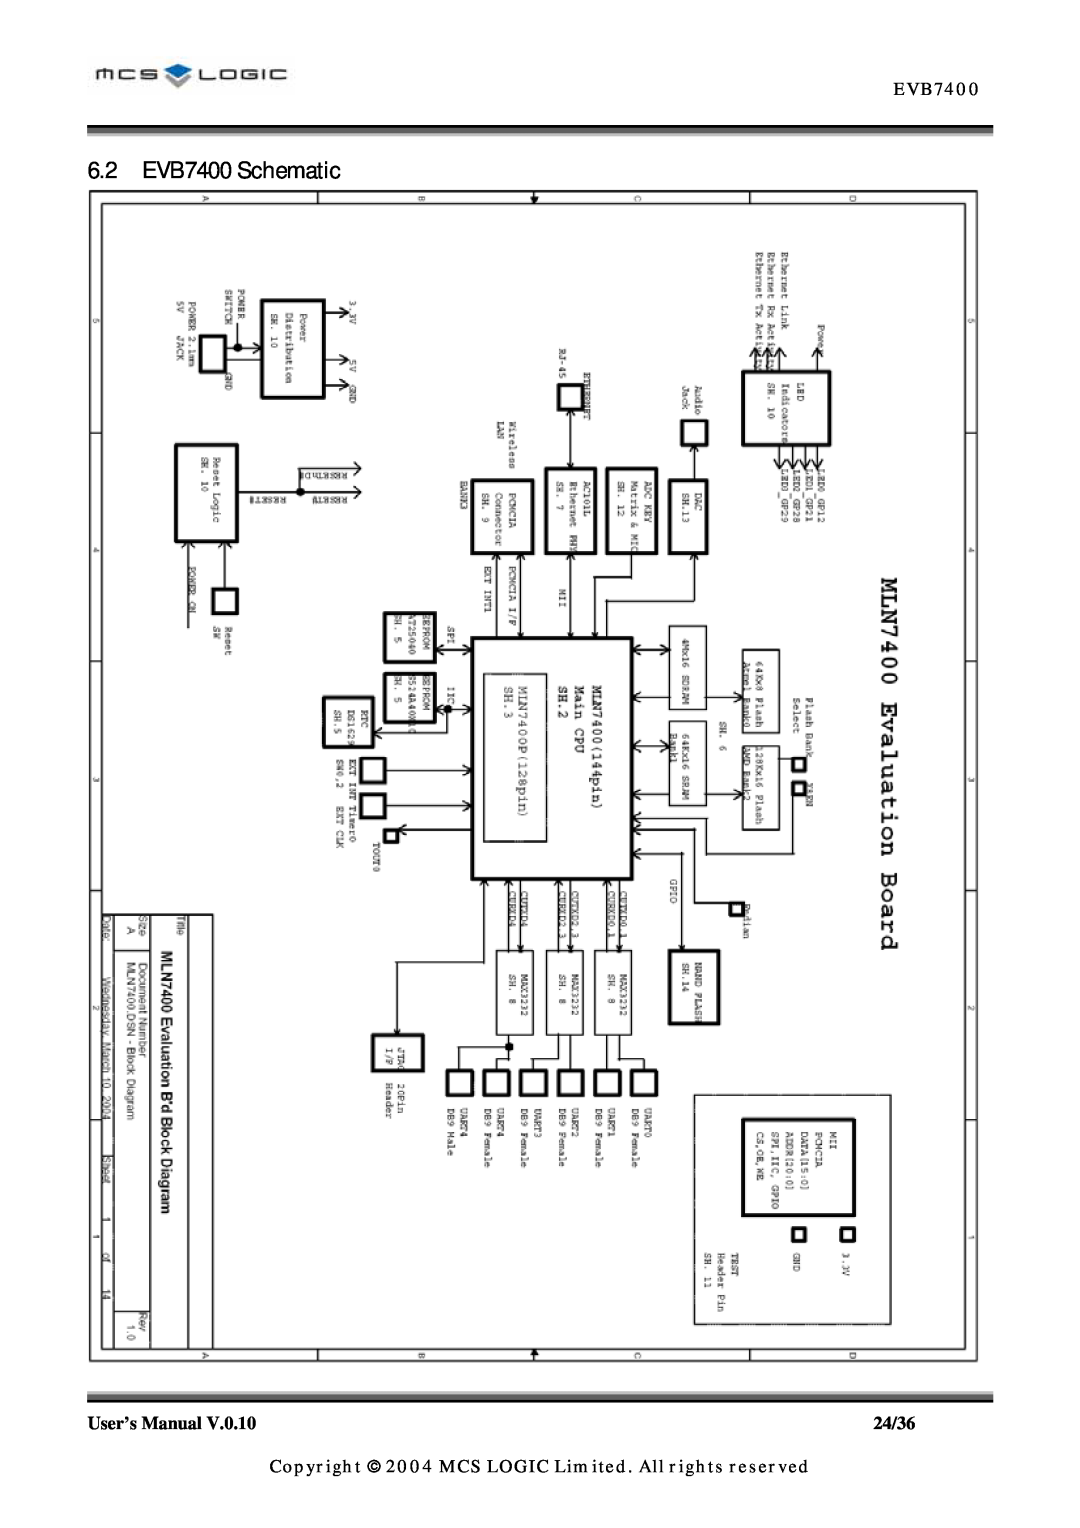 ADC MLN7400 manual 6.2 EVB7400 Schematic, Copyright 2004 MCS LOGIC Limited. All rights reserved 